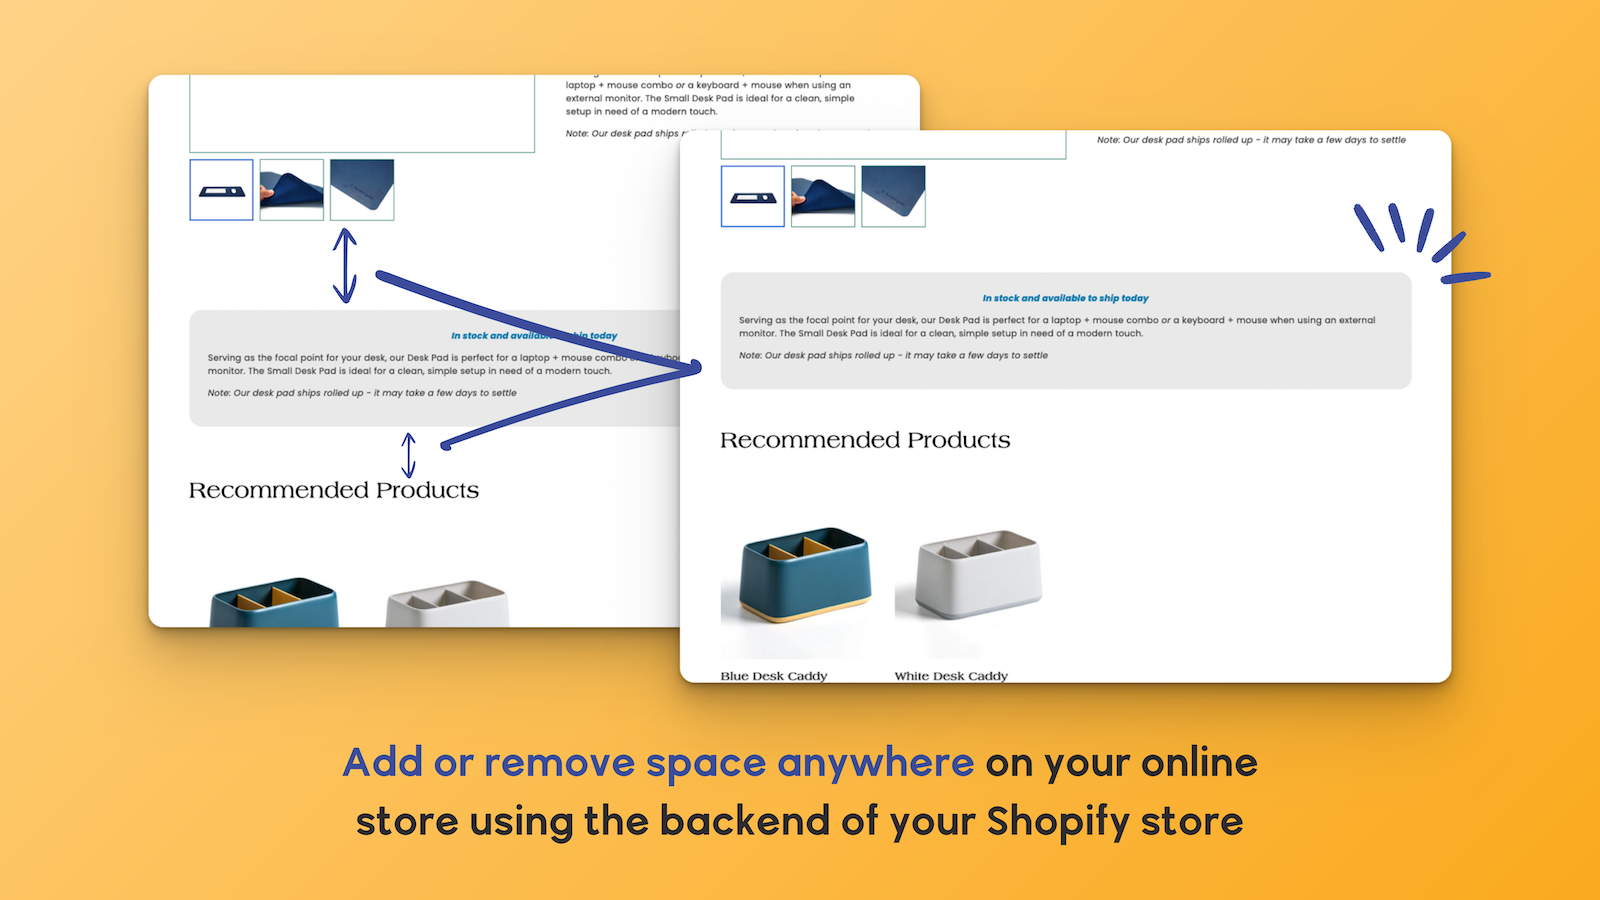 Add and remove space anywhere on your online store using the